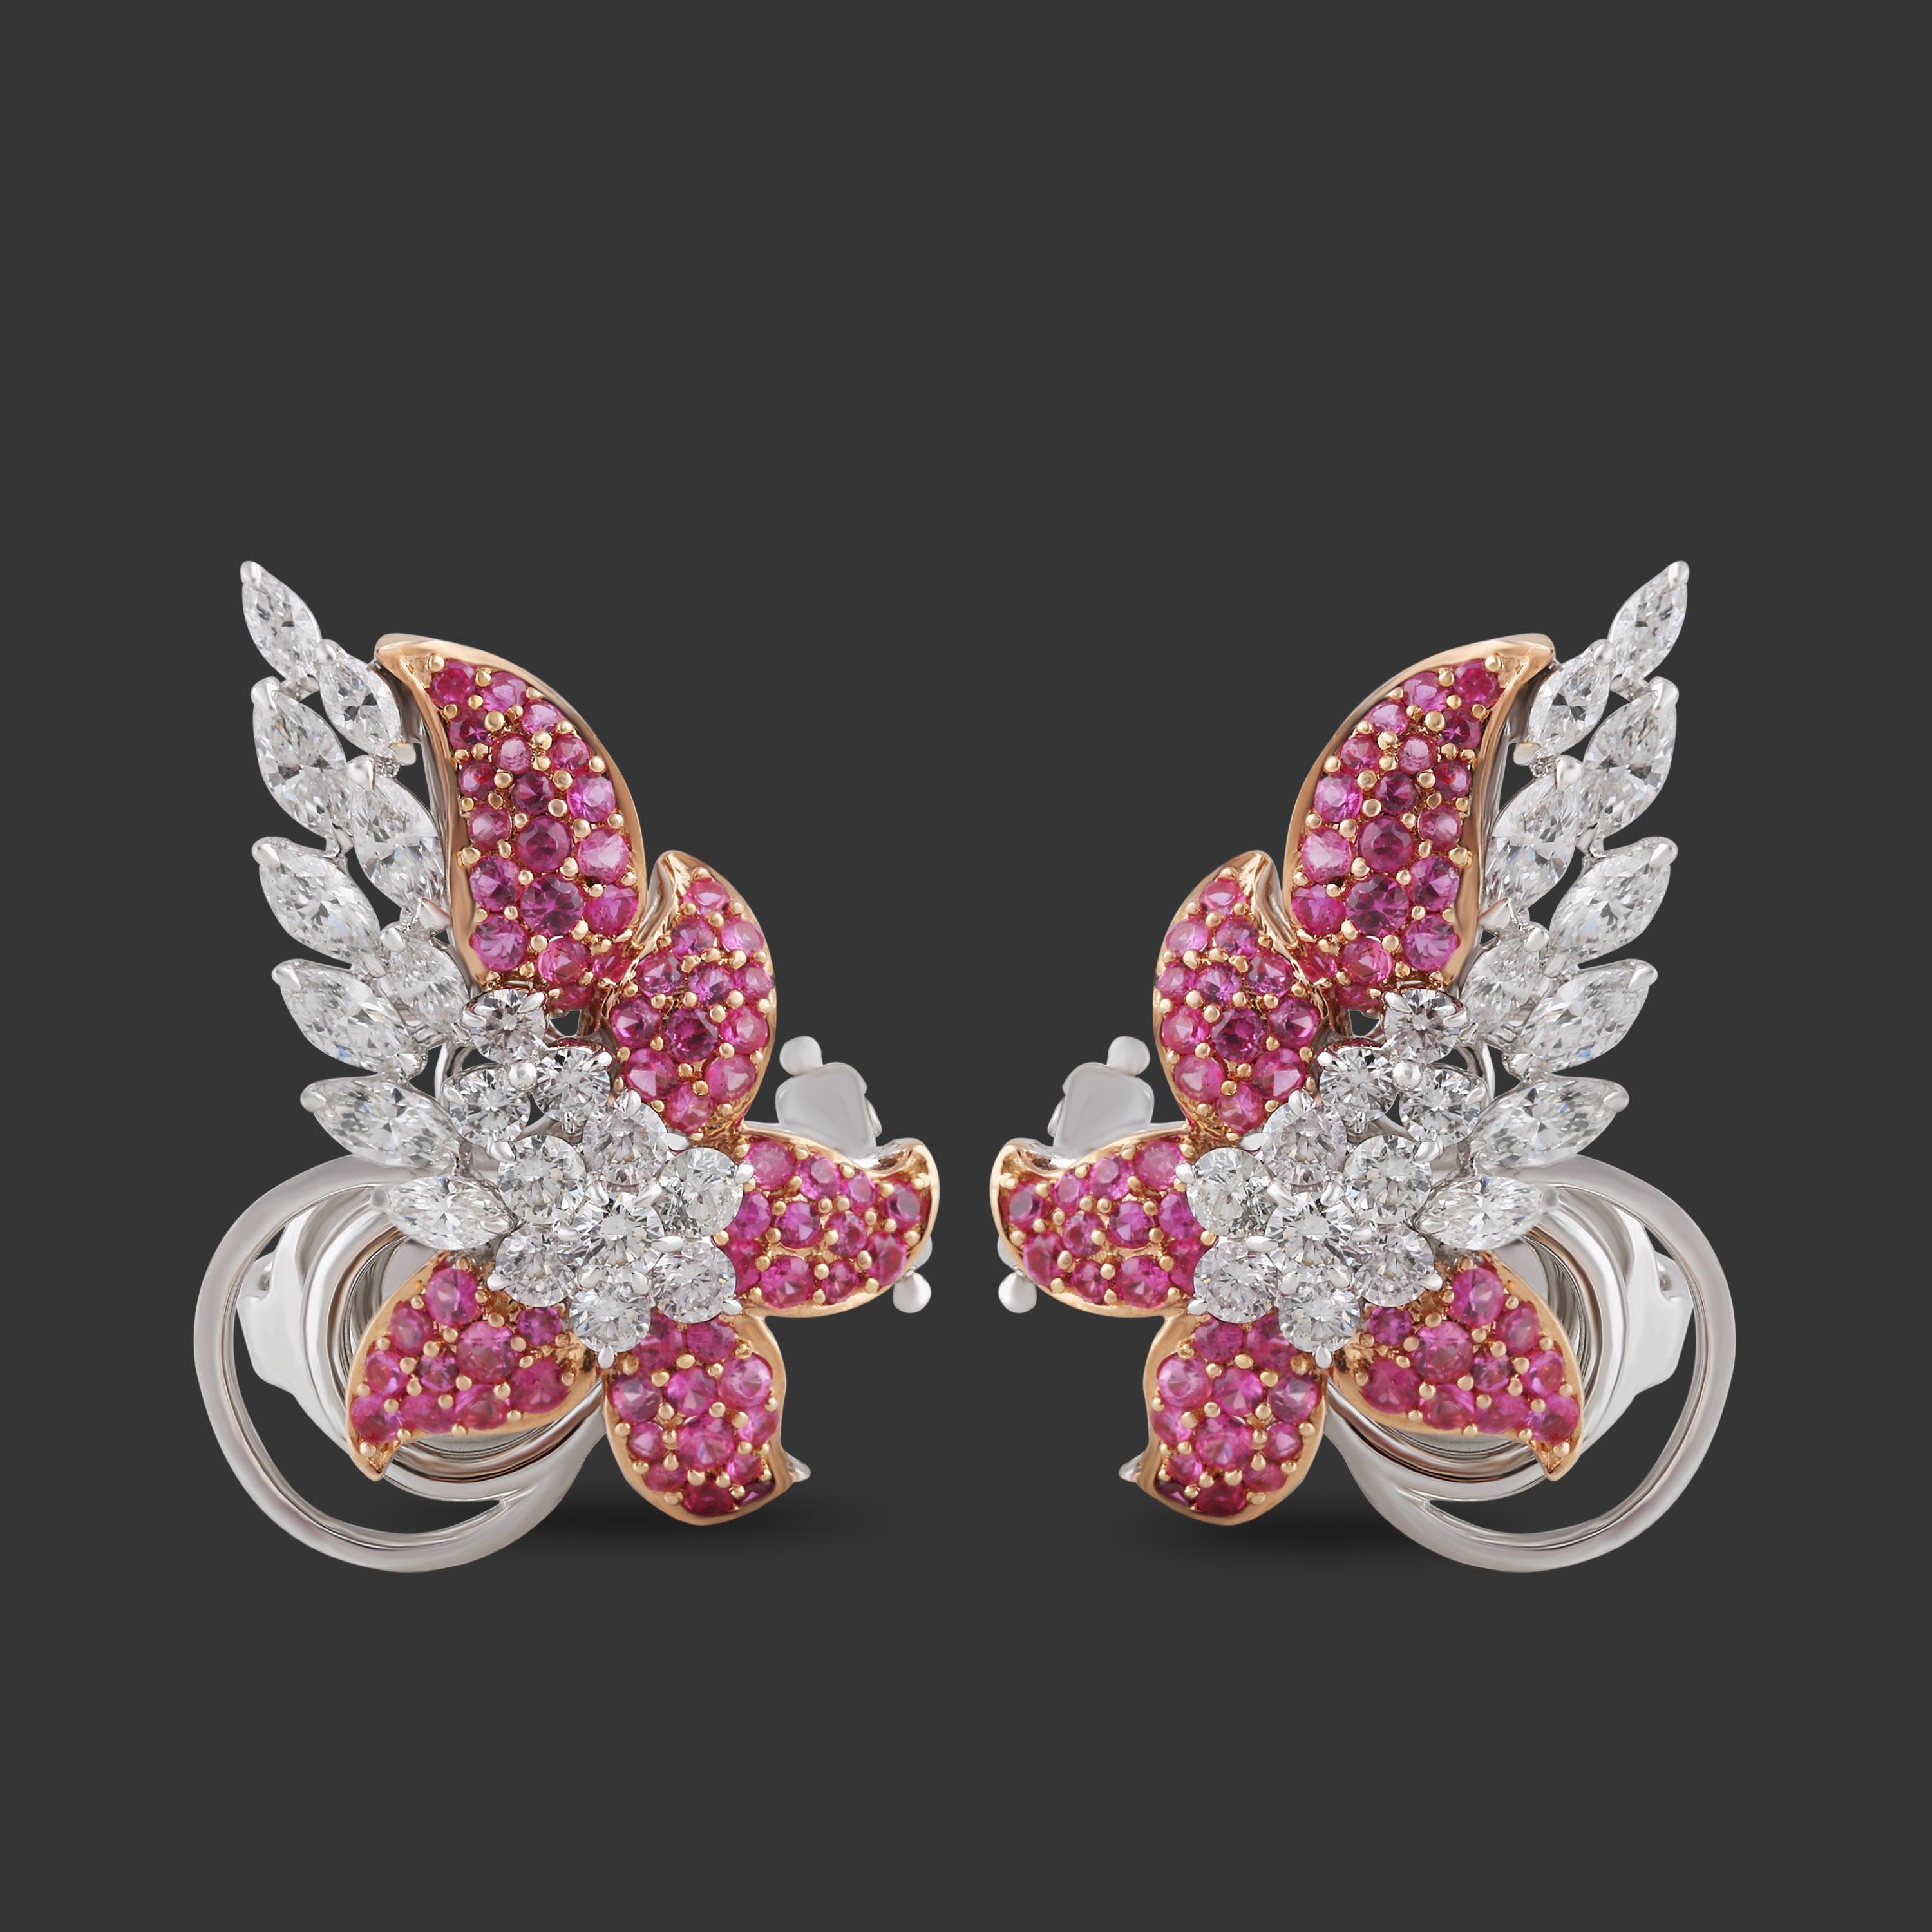 Studio Rêves Diamonds and Pink Sapphire Clip-On Earrings in 18 Karat Gold For Sale 1